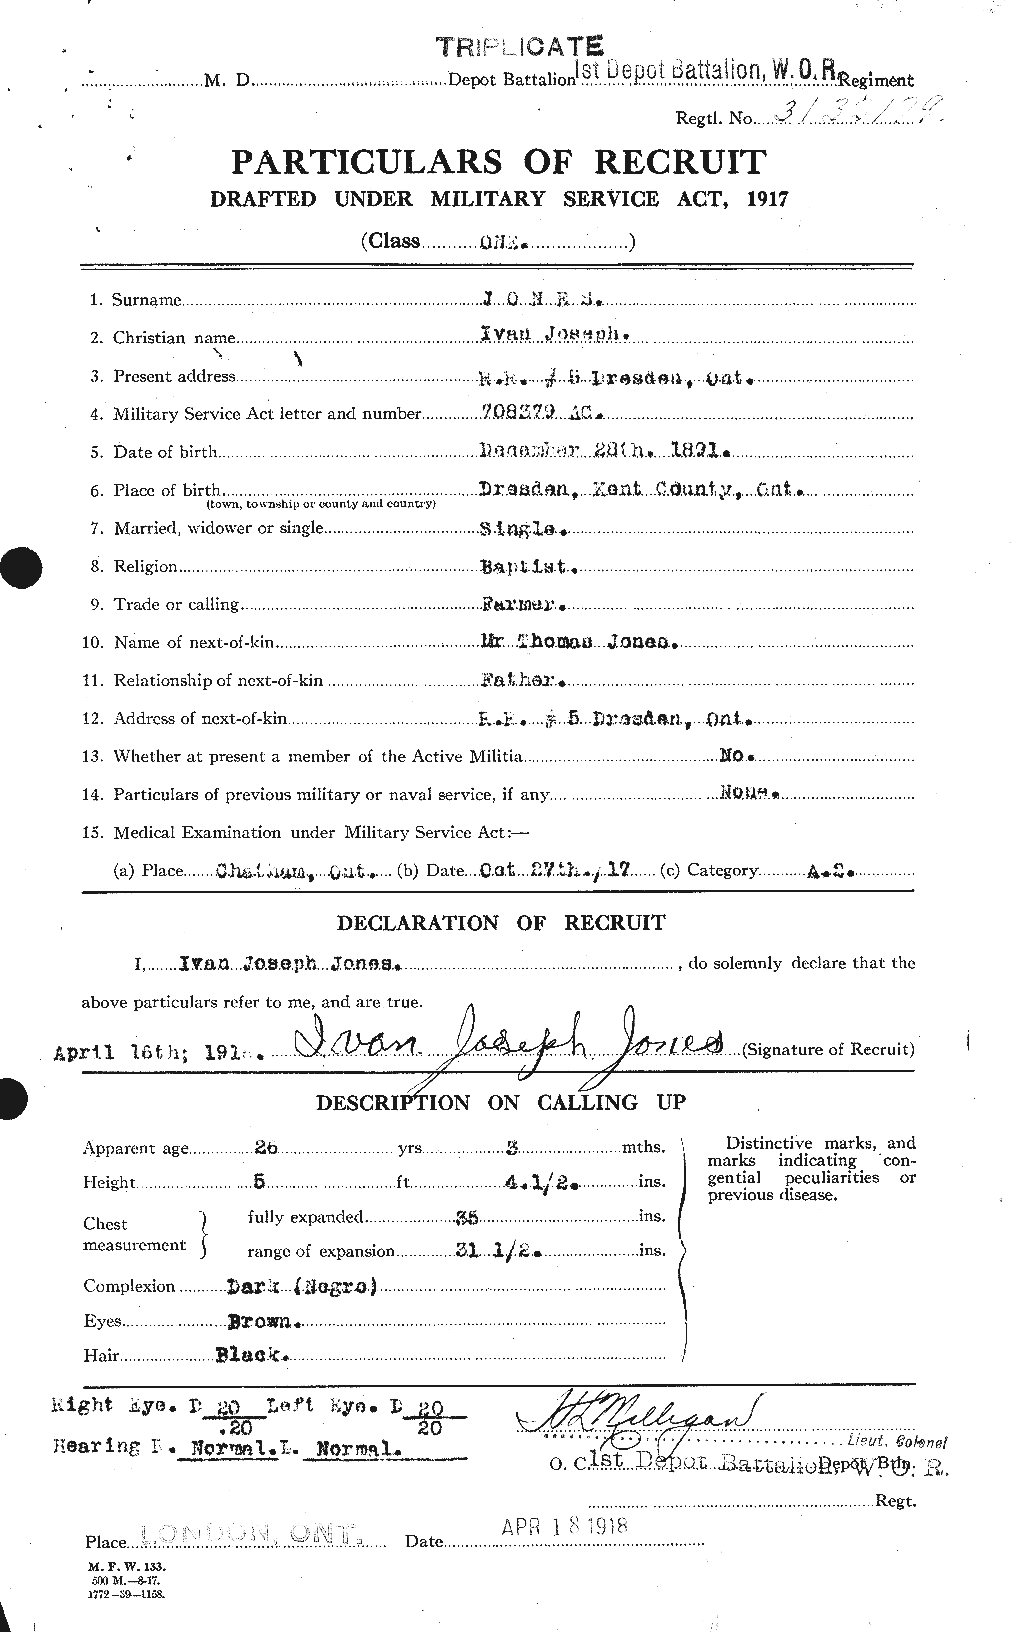 Personnel Records of the First World War - CEF 425553a